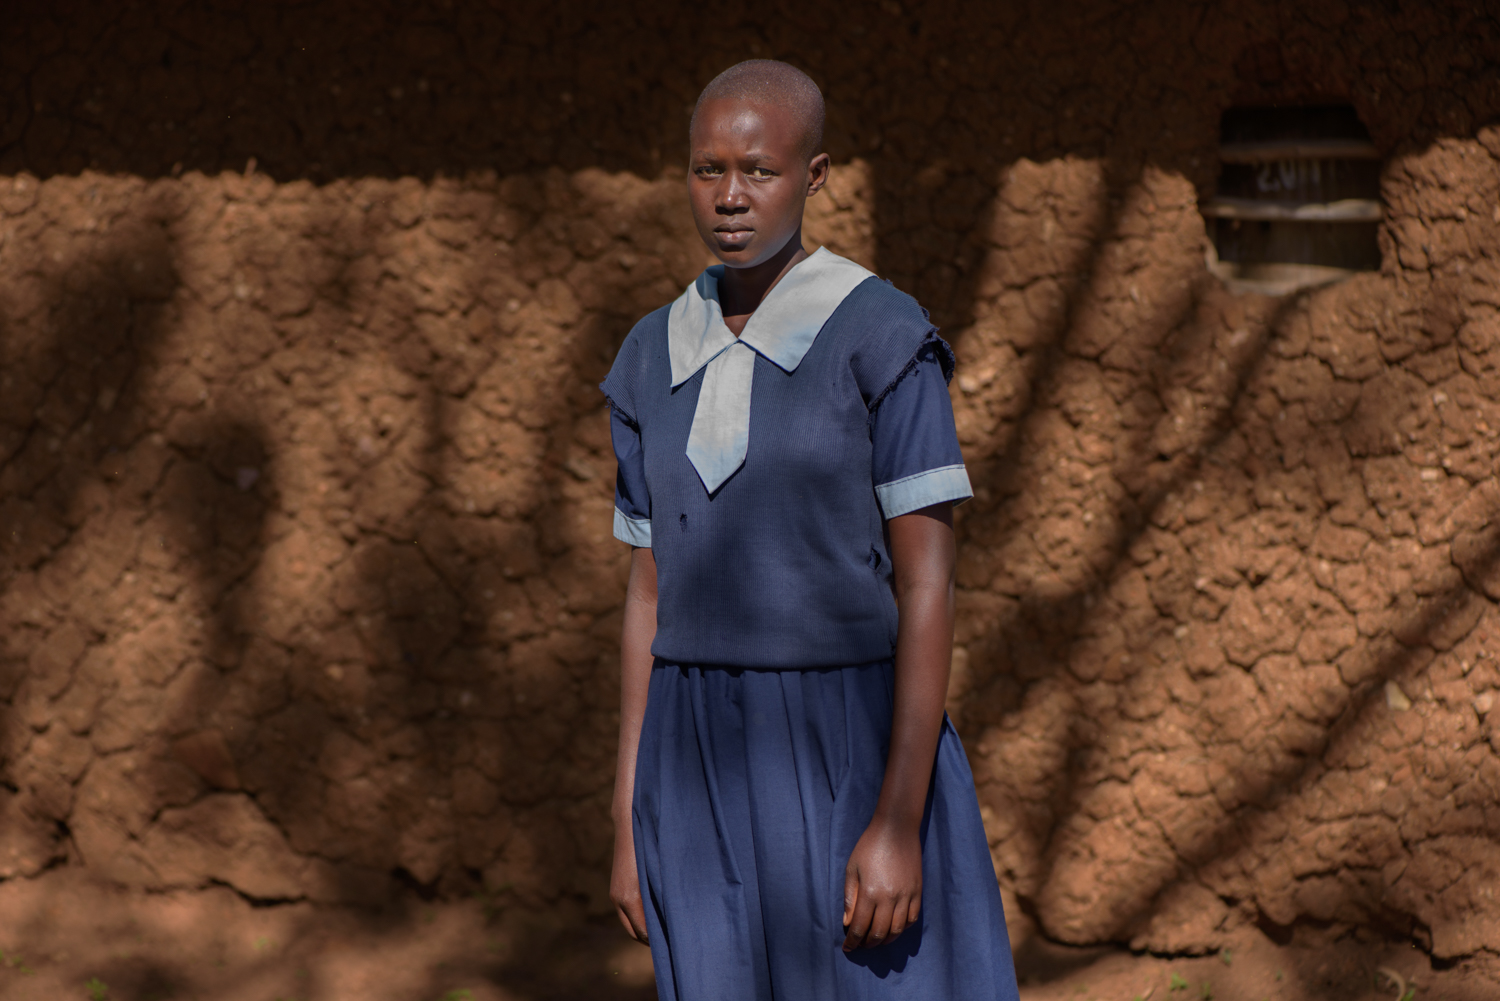  L.N., 18, studies in Class 7 at the Ngukumahando Primary School, Migori County. L. used to have sex with a boy, from another school who promised to marry her. After finding out about her pregnancy, her mother came with her to the school and informed